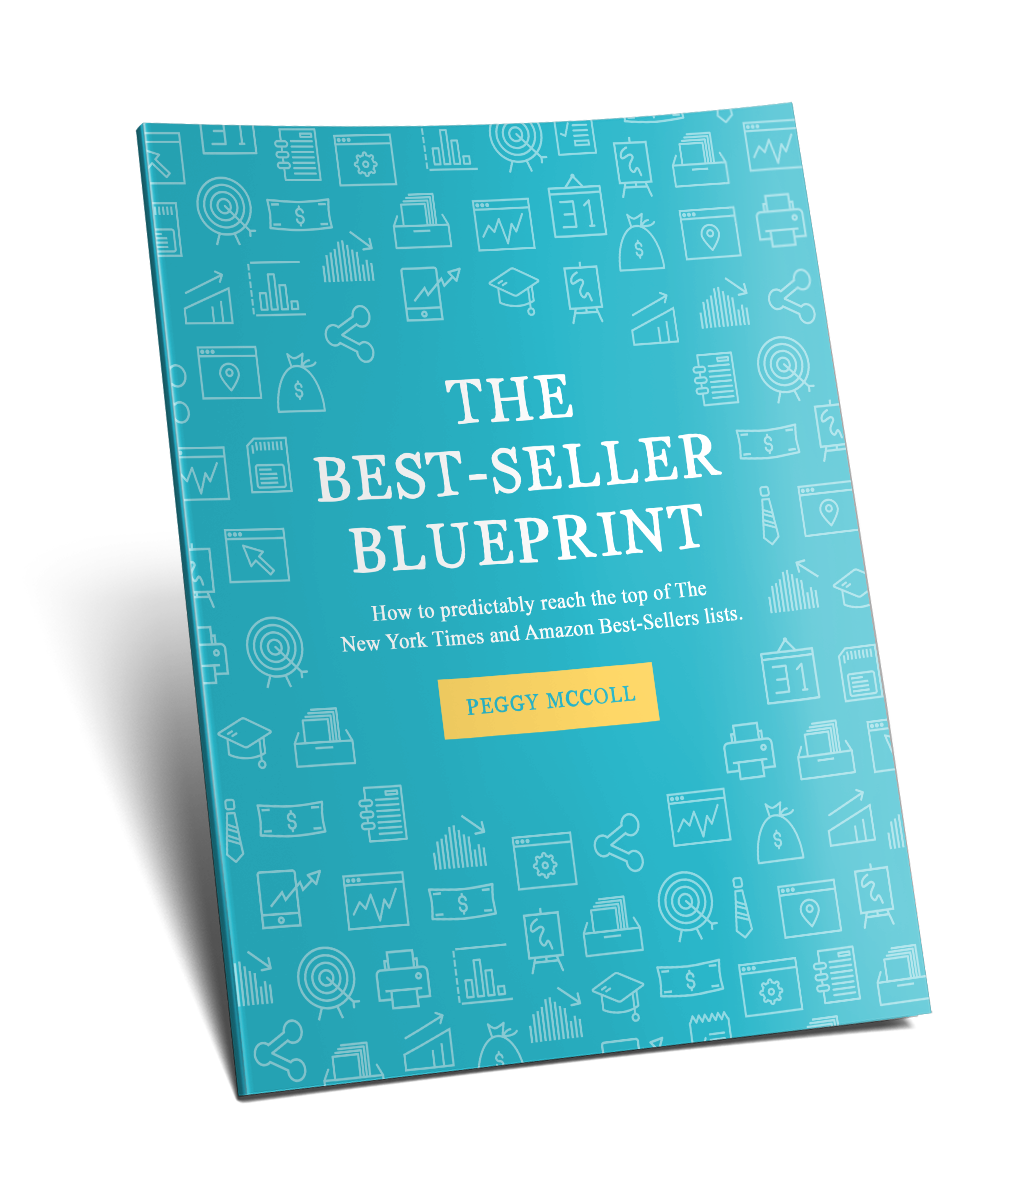 Learn my New York Times and Amazon Best-Seller Blueprint